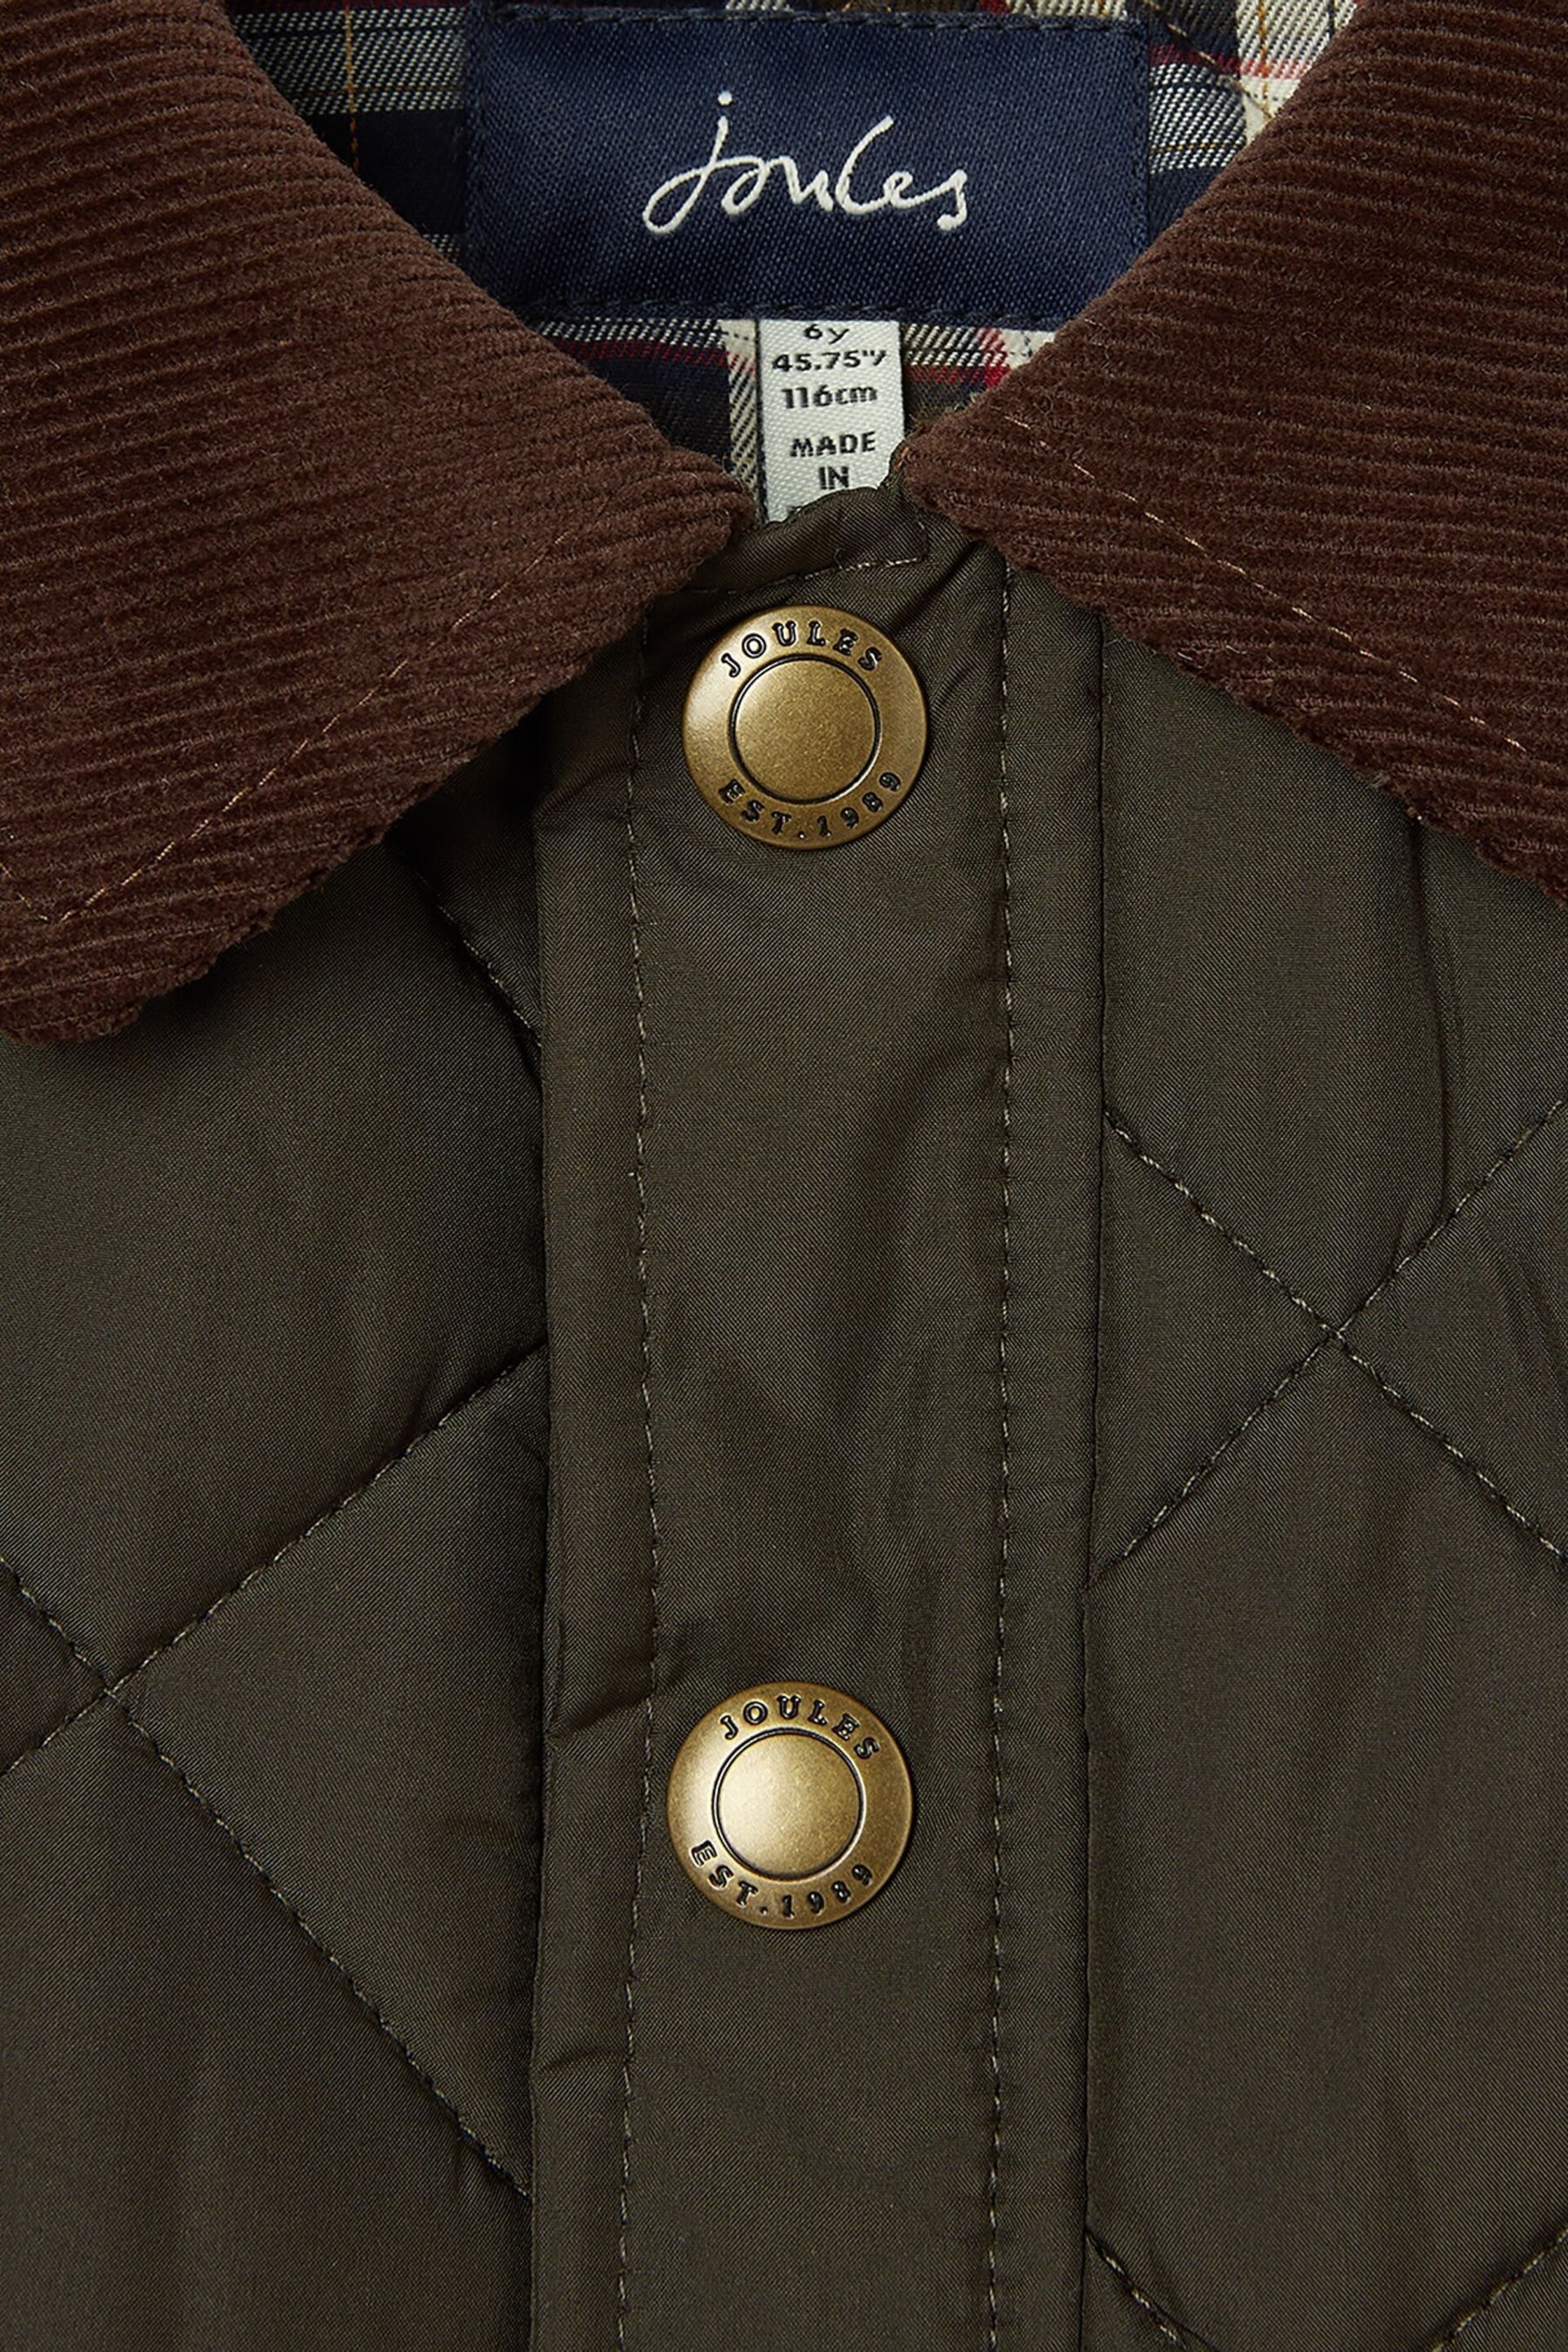 Joules Ambrose Green Diamond Quilted Jacket - Image 5 of 6